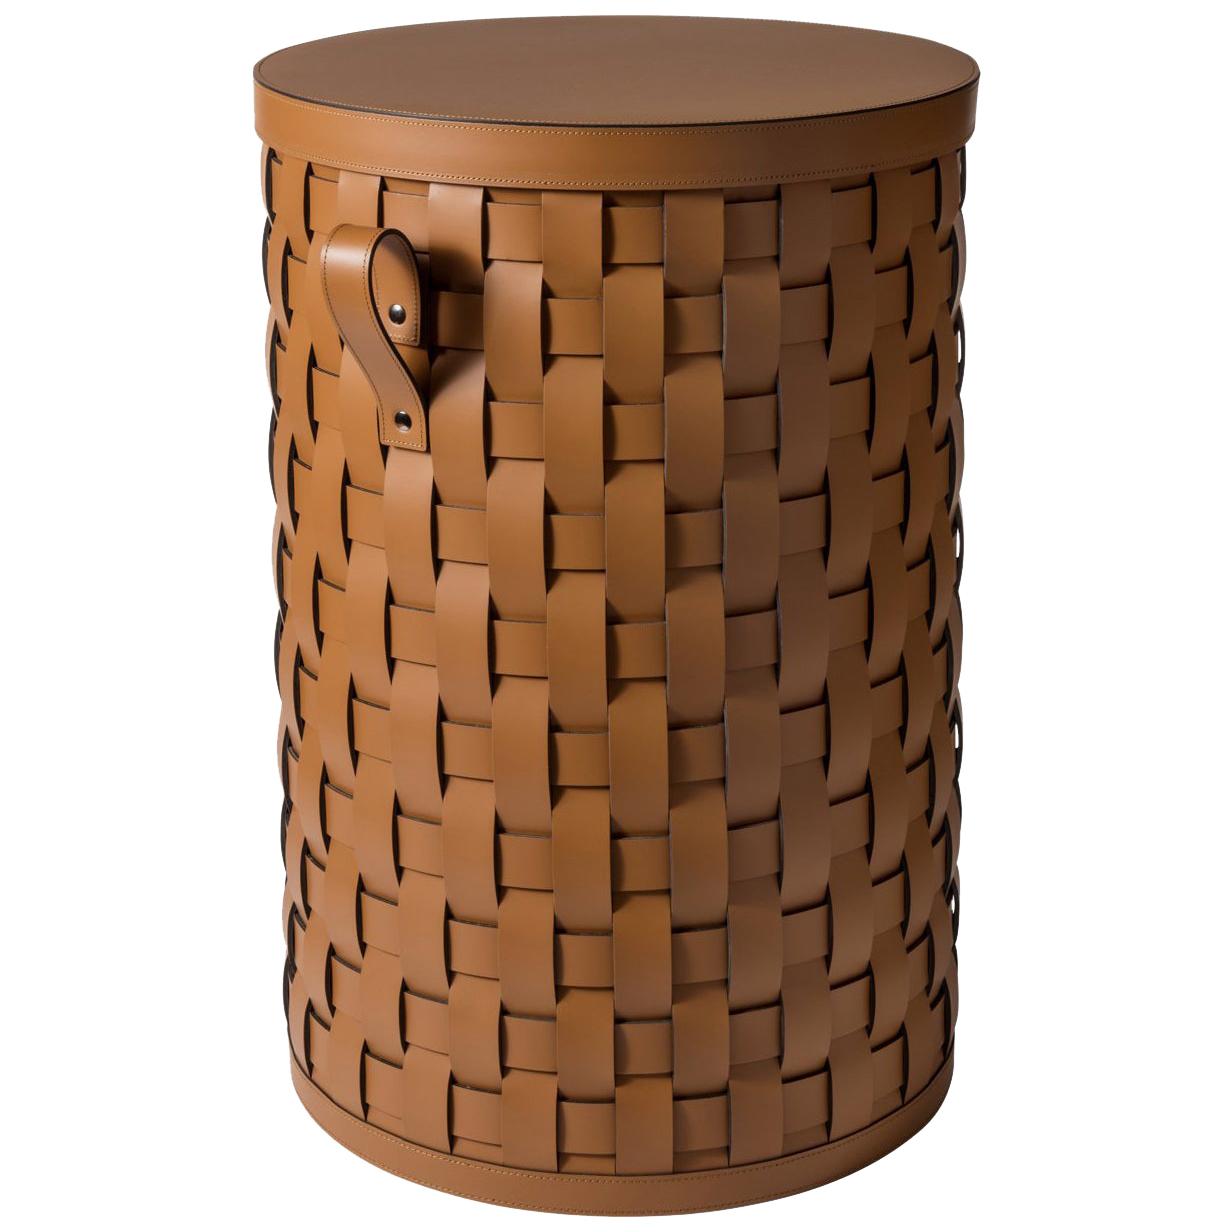 Demetra Tan Round Tall Basket with Lid For Sale